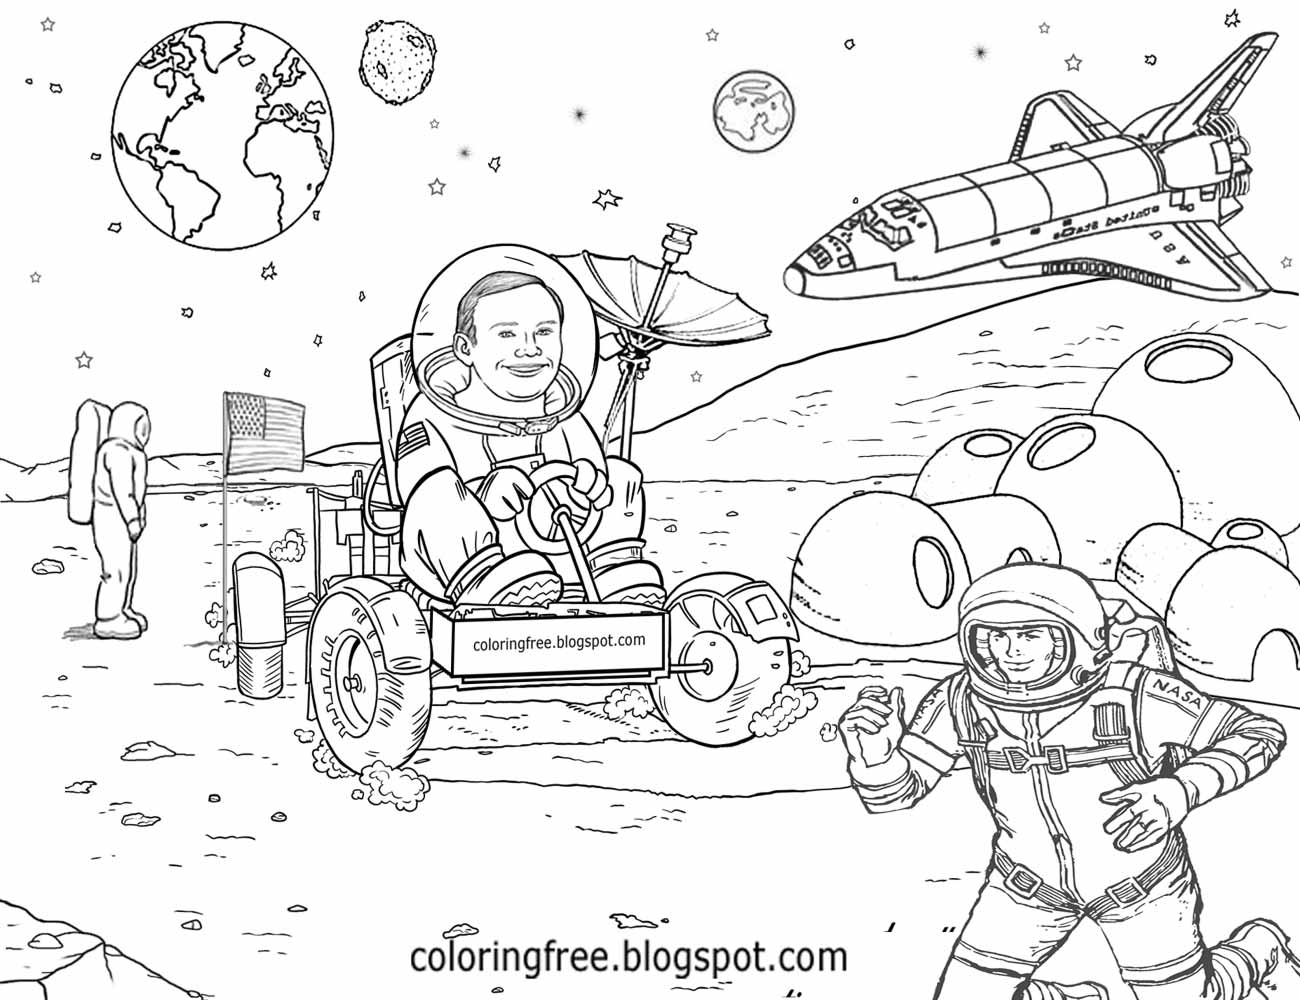 Download Free Coloring Pages Printable Pictures To Color Kids Drawing ideas: Planet and space solar ...